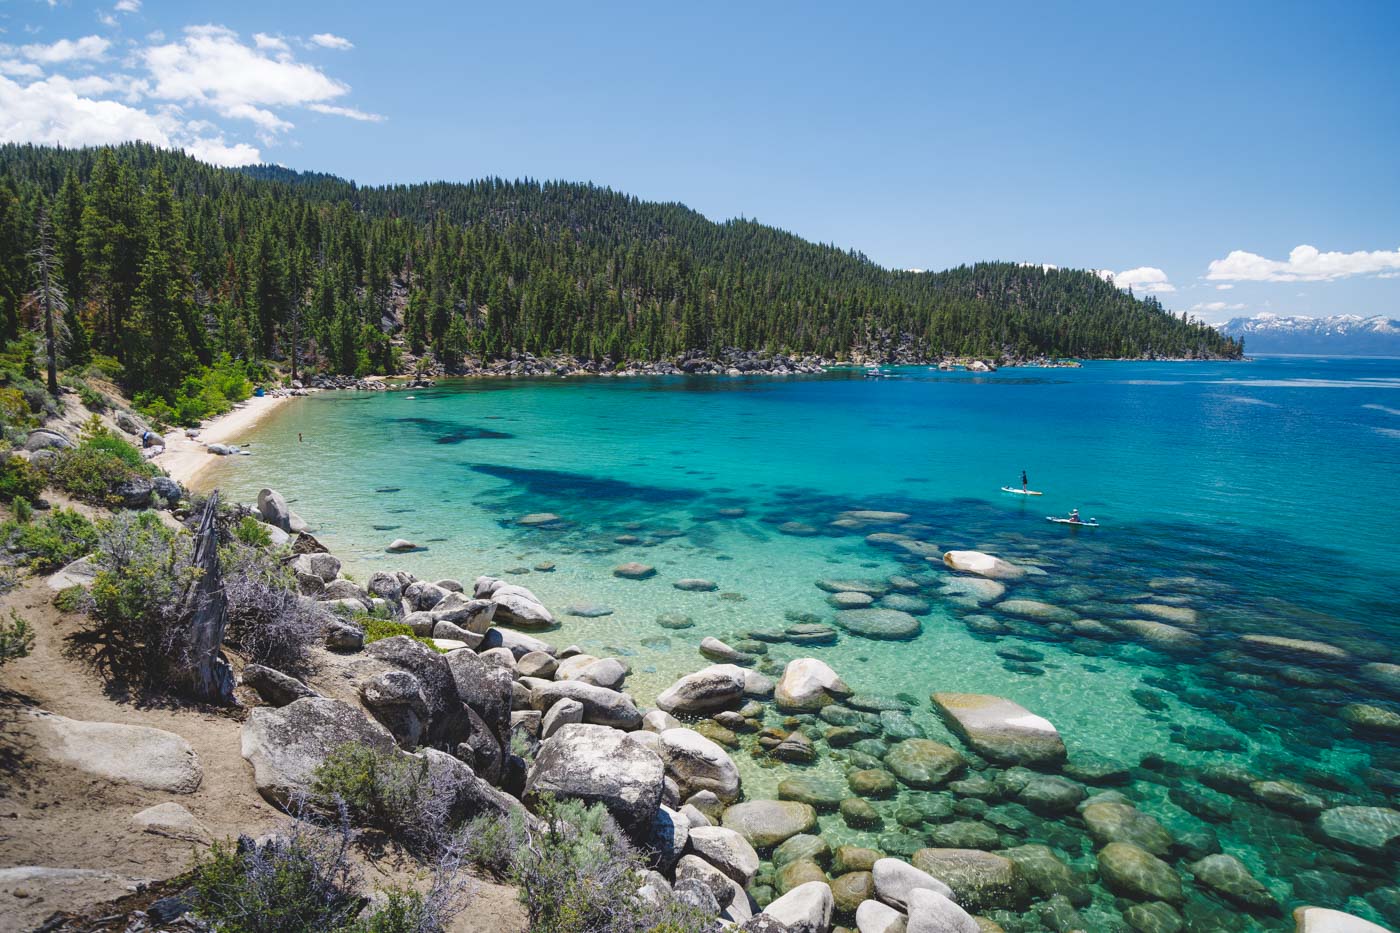 Two paddle boarders on the turquoise waters of Lake Tahoe heading towards Boaters Beach over rocks in the lake with trees around the beach.